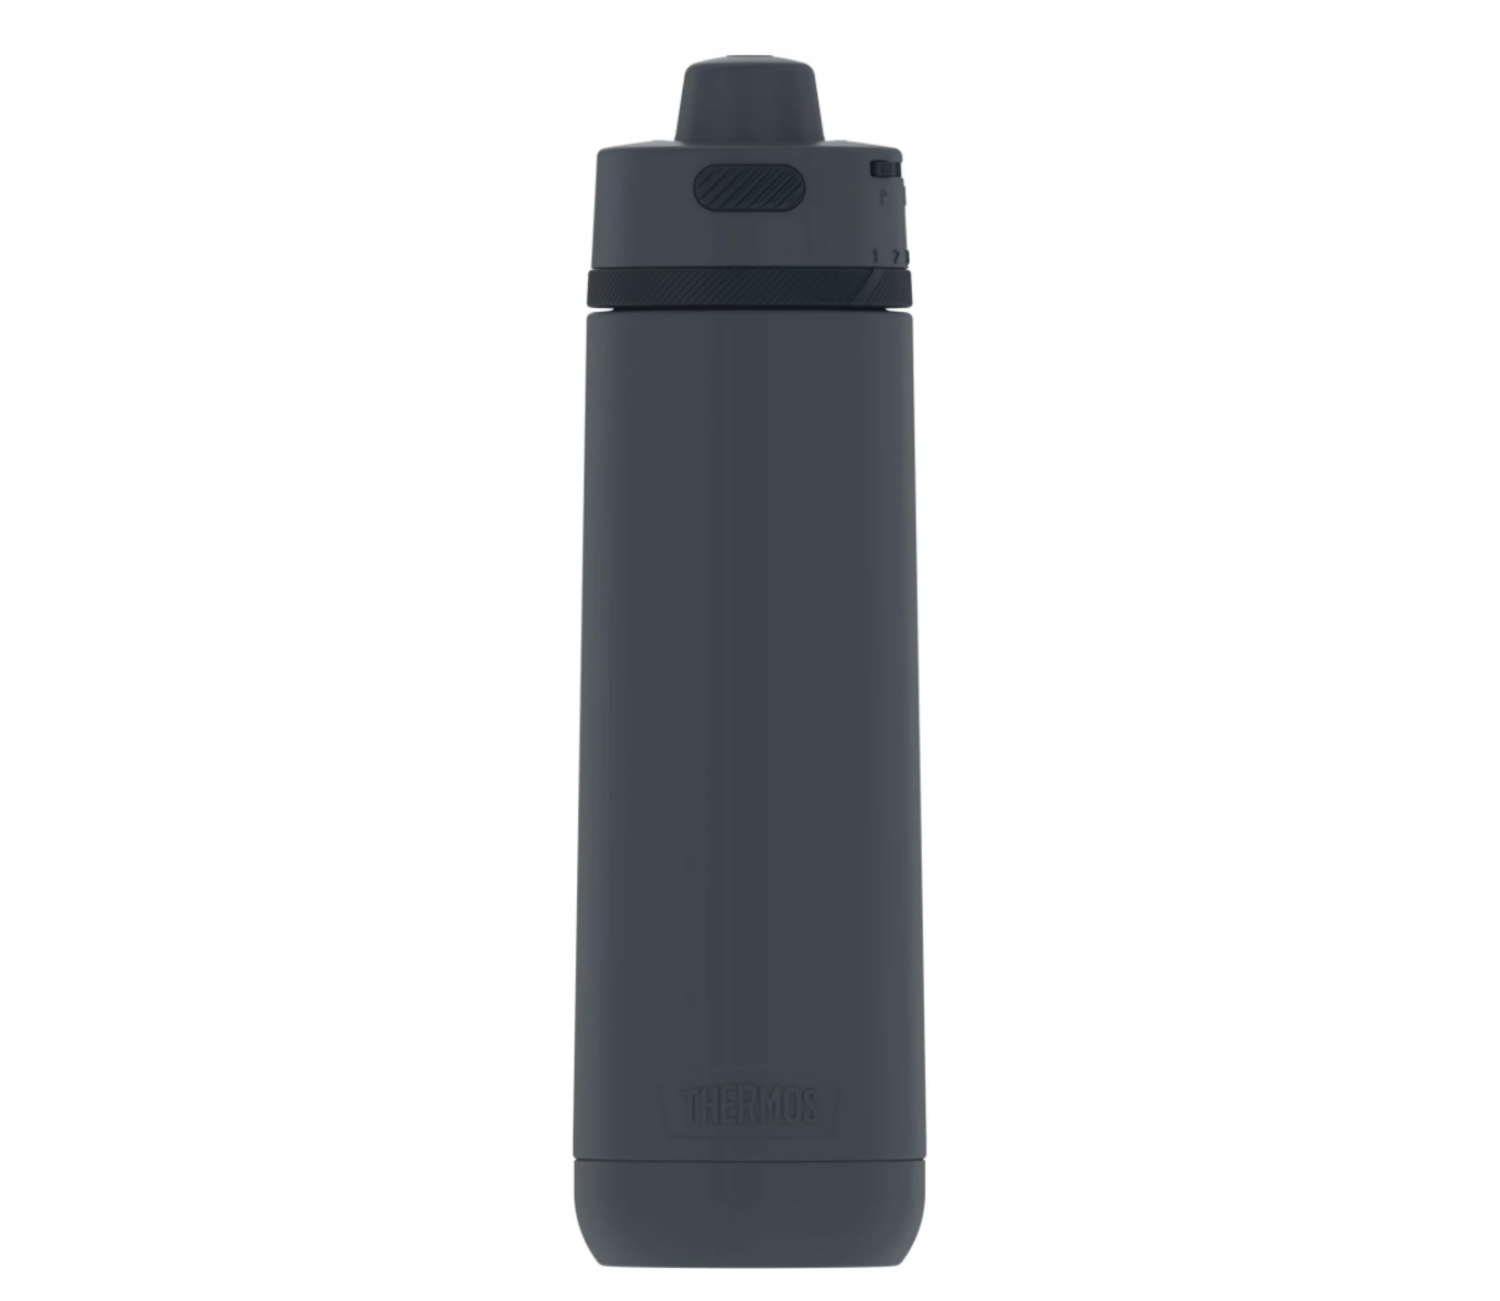 ThermoFlask 24oz Stainless Steel Insulated Water Bottle with Spout